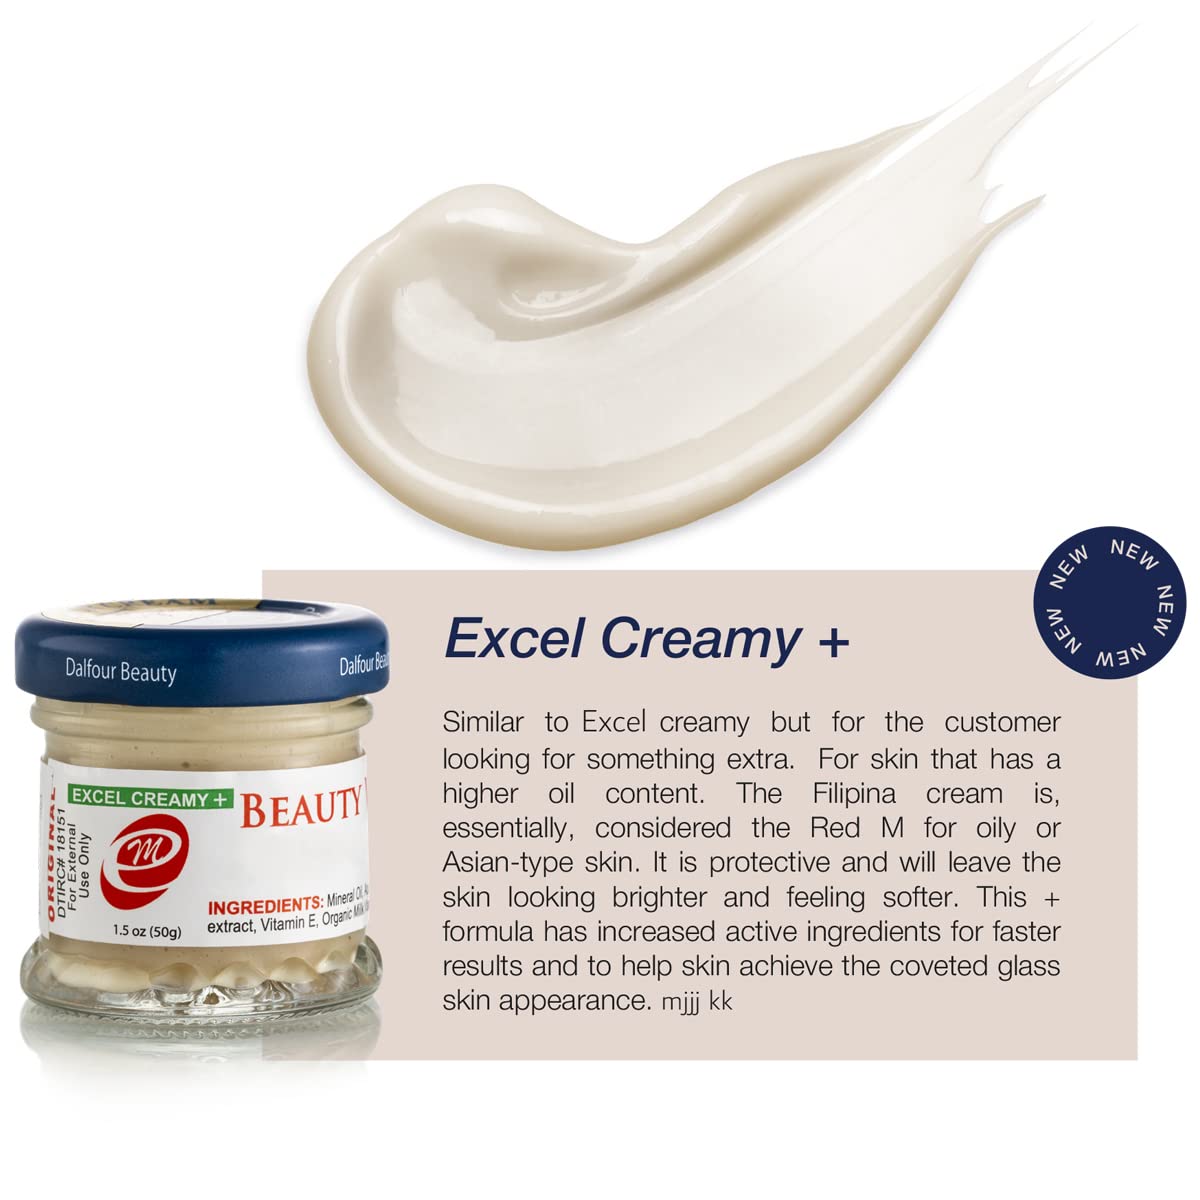 Dalfour Beauty Excel Creamy + 50g